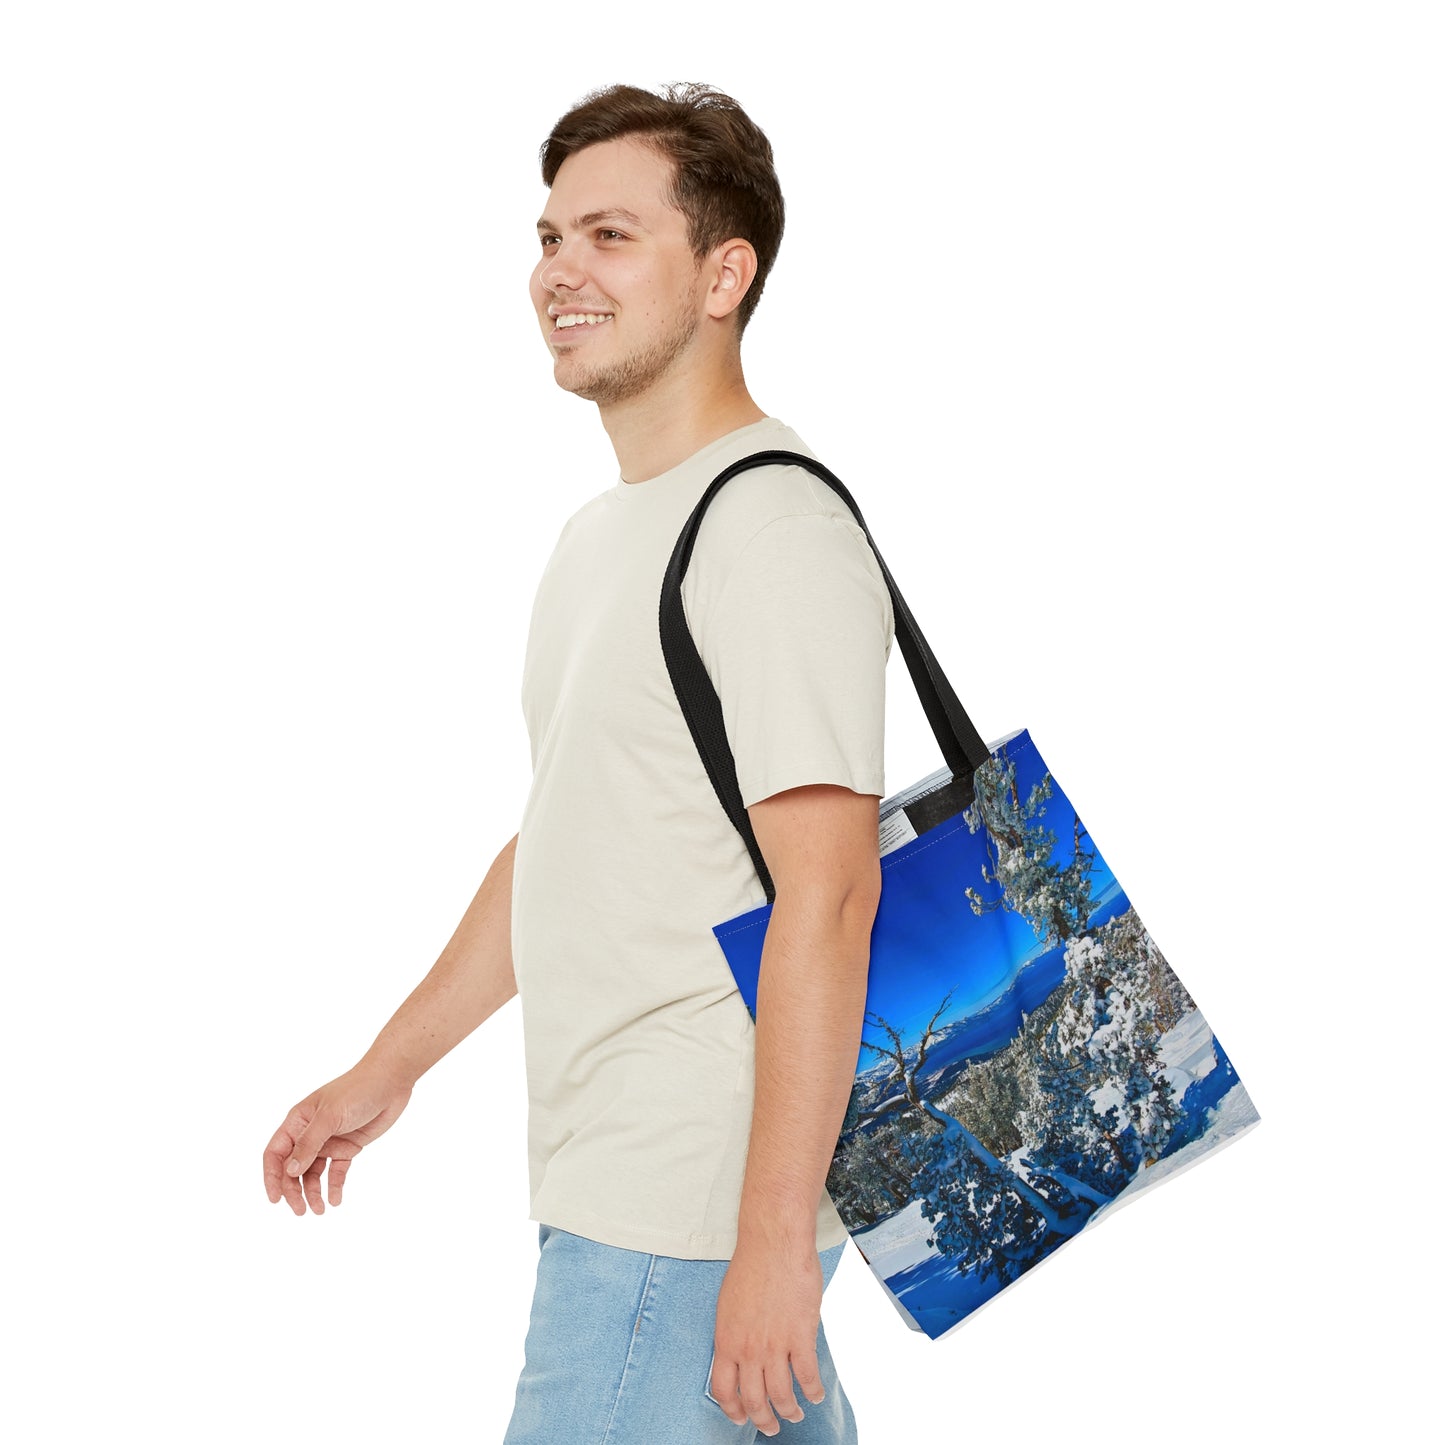 Tote Bag - Lake Tahoe in Winter/Forest winterscape